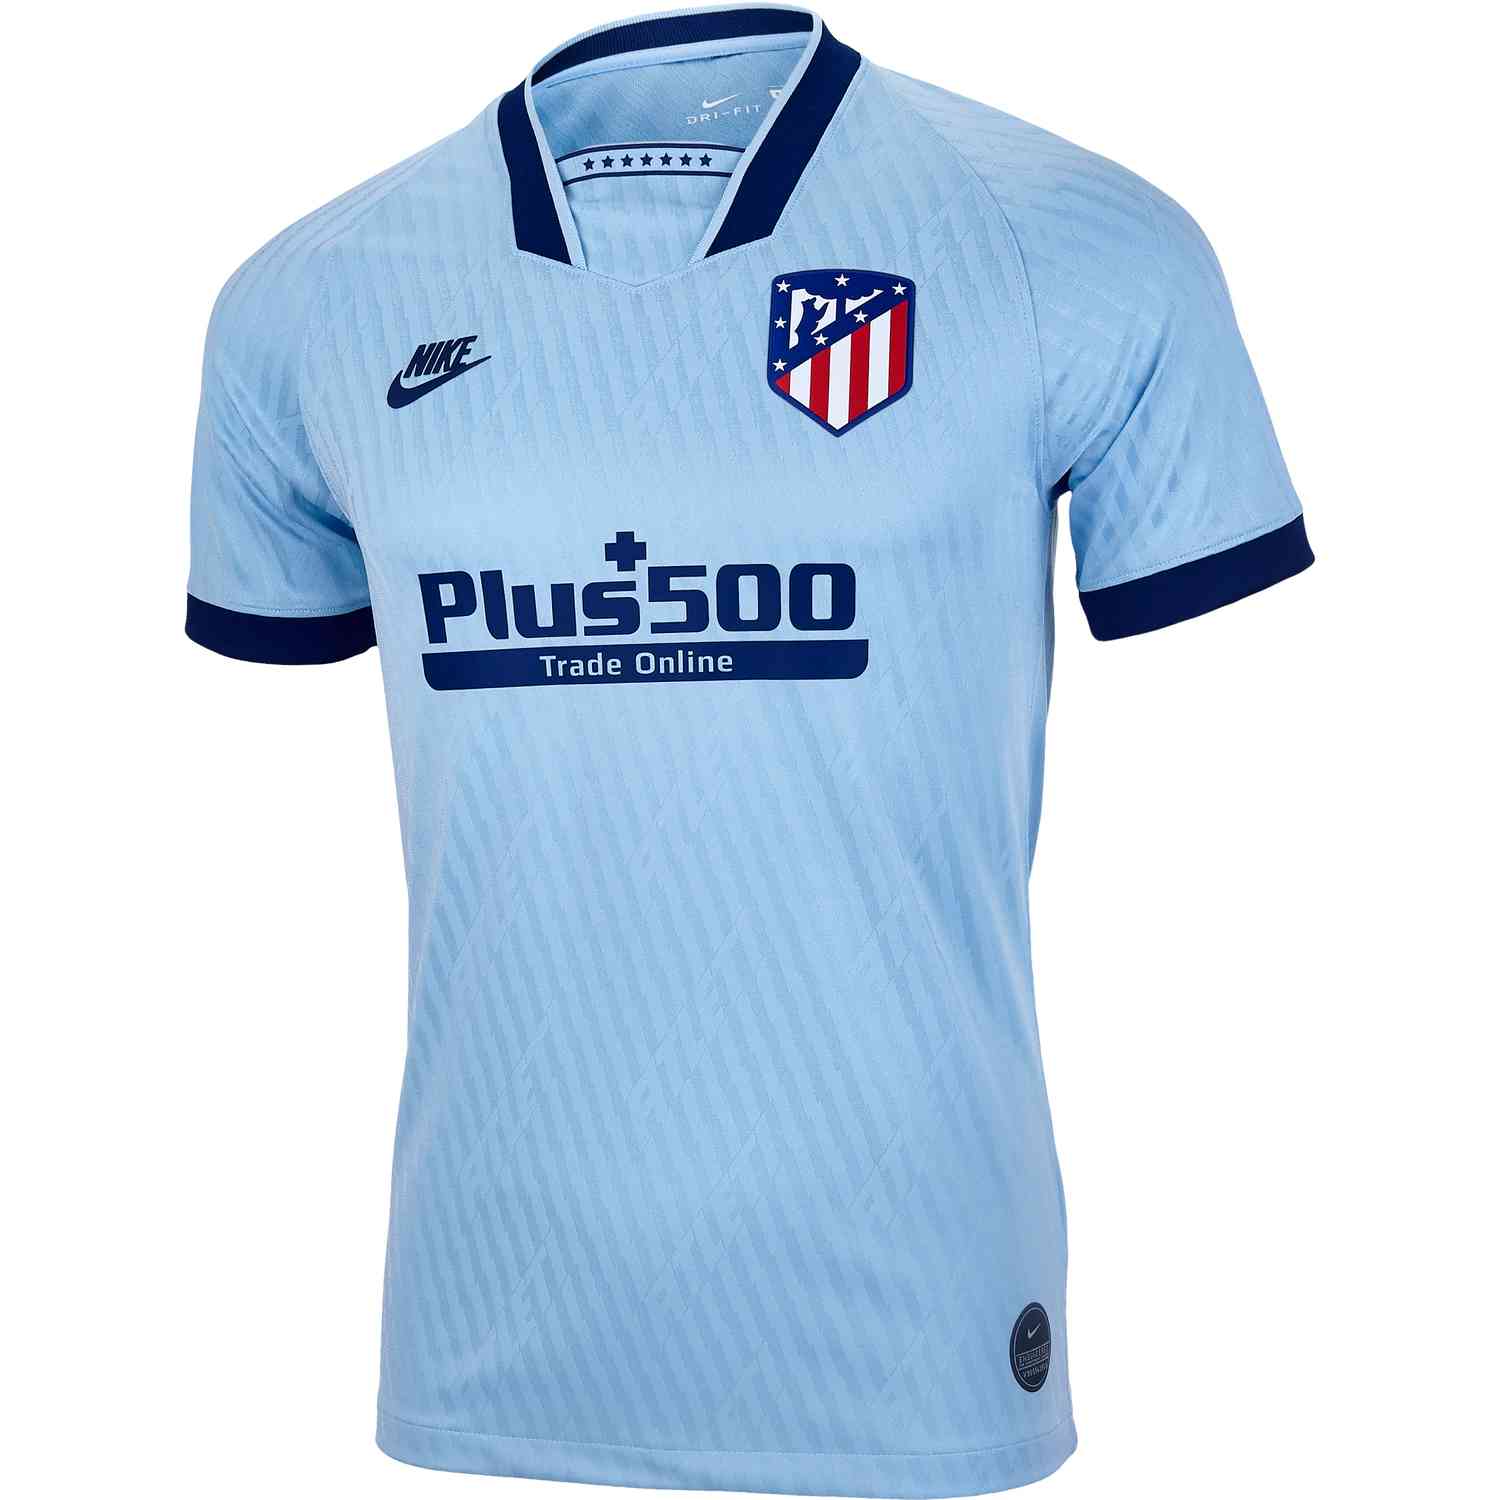 atletico madrid 3rd jersey